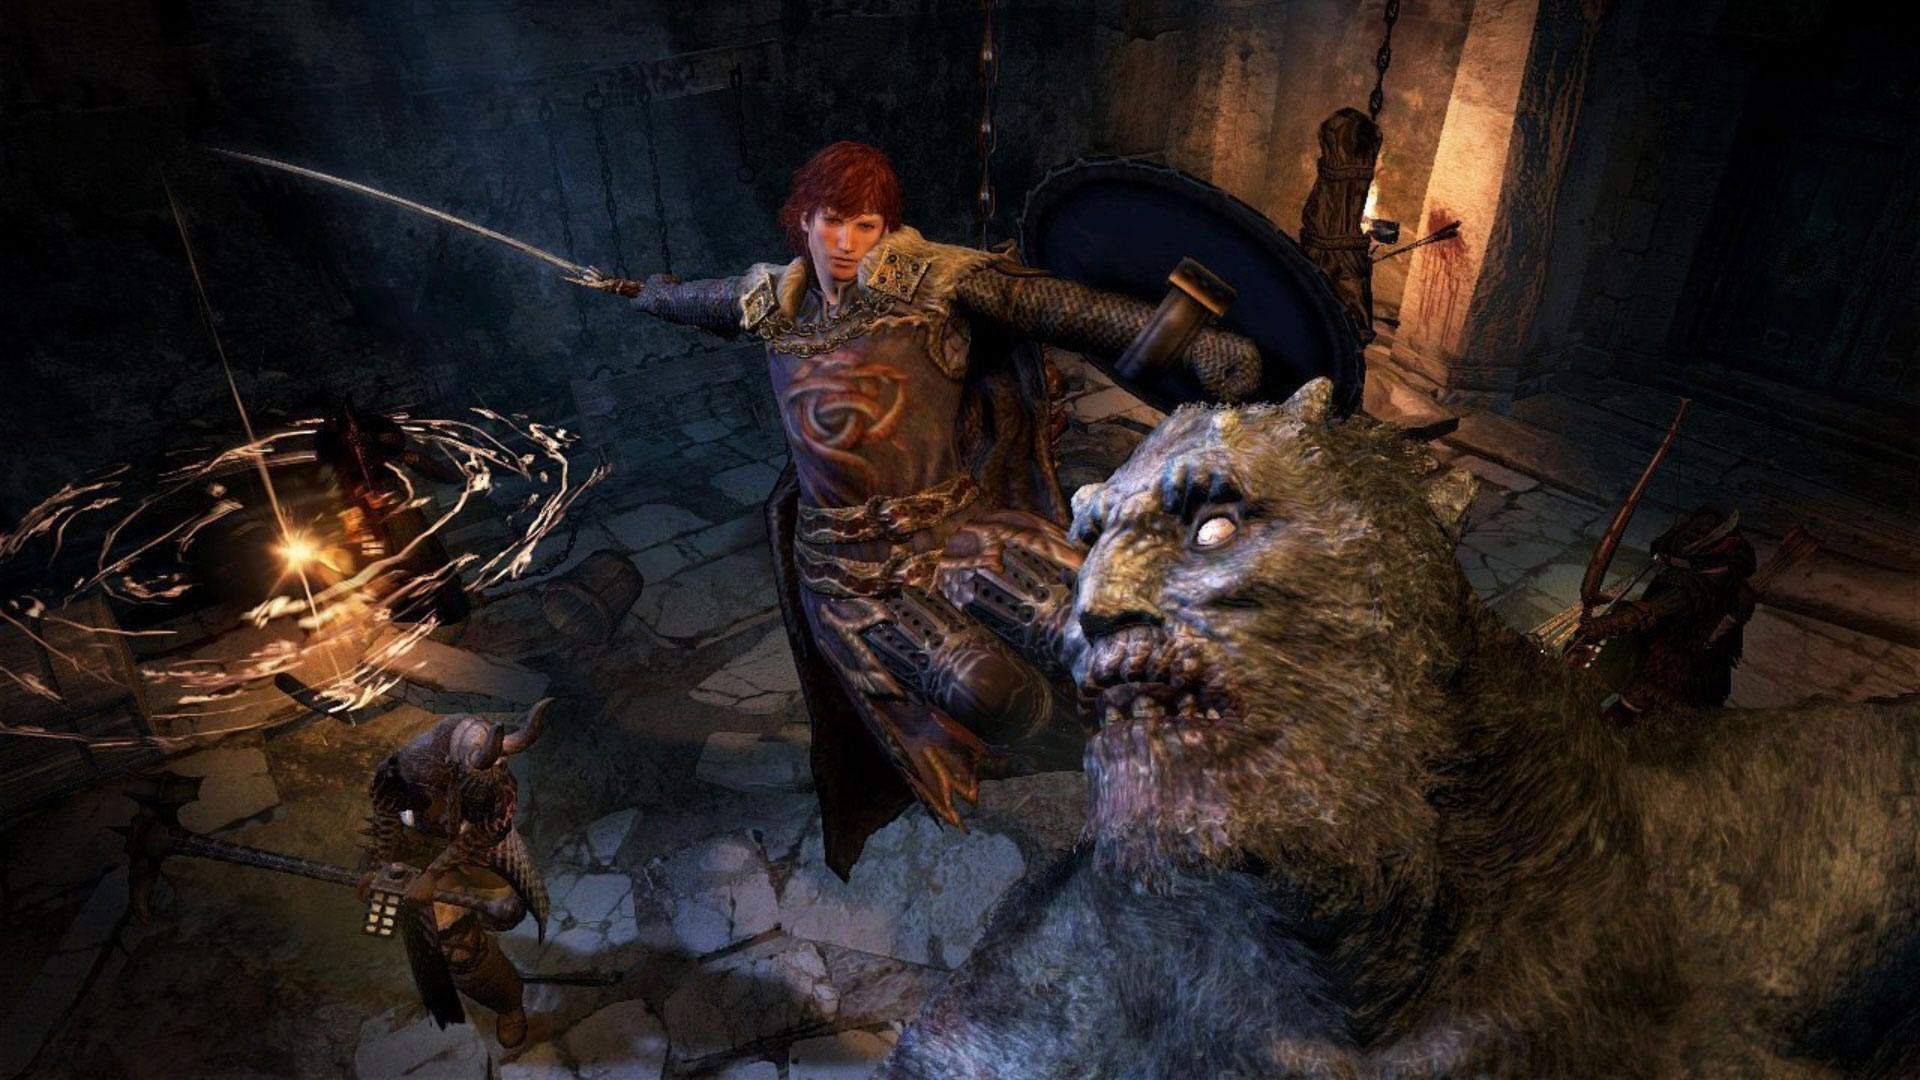 Dragon's Dogma player mounted on a giant about to stab them in the head